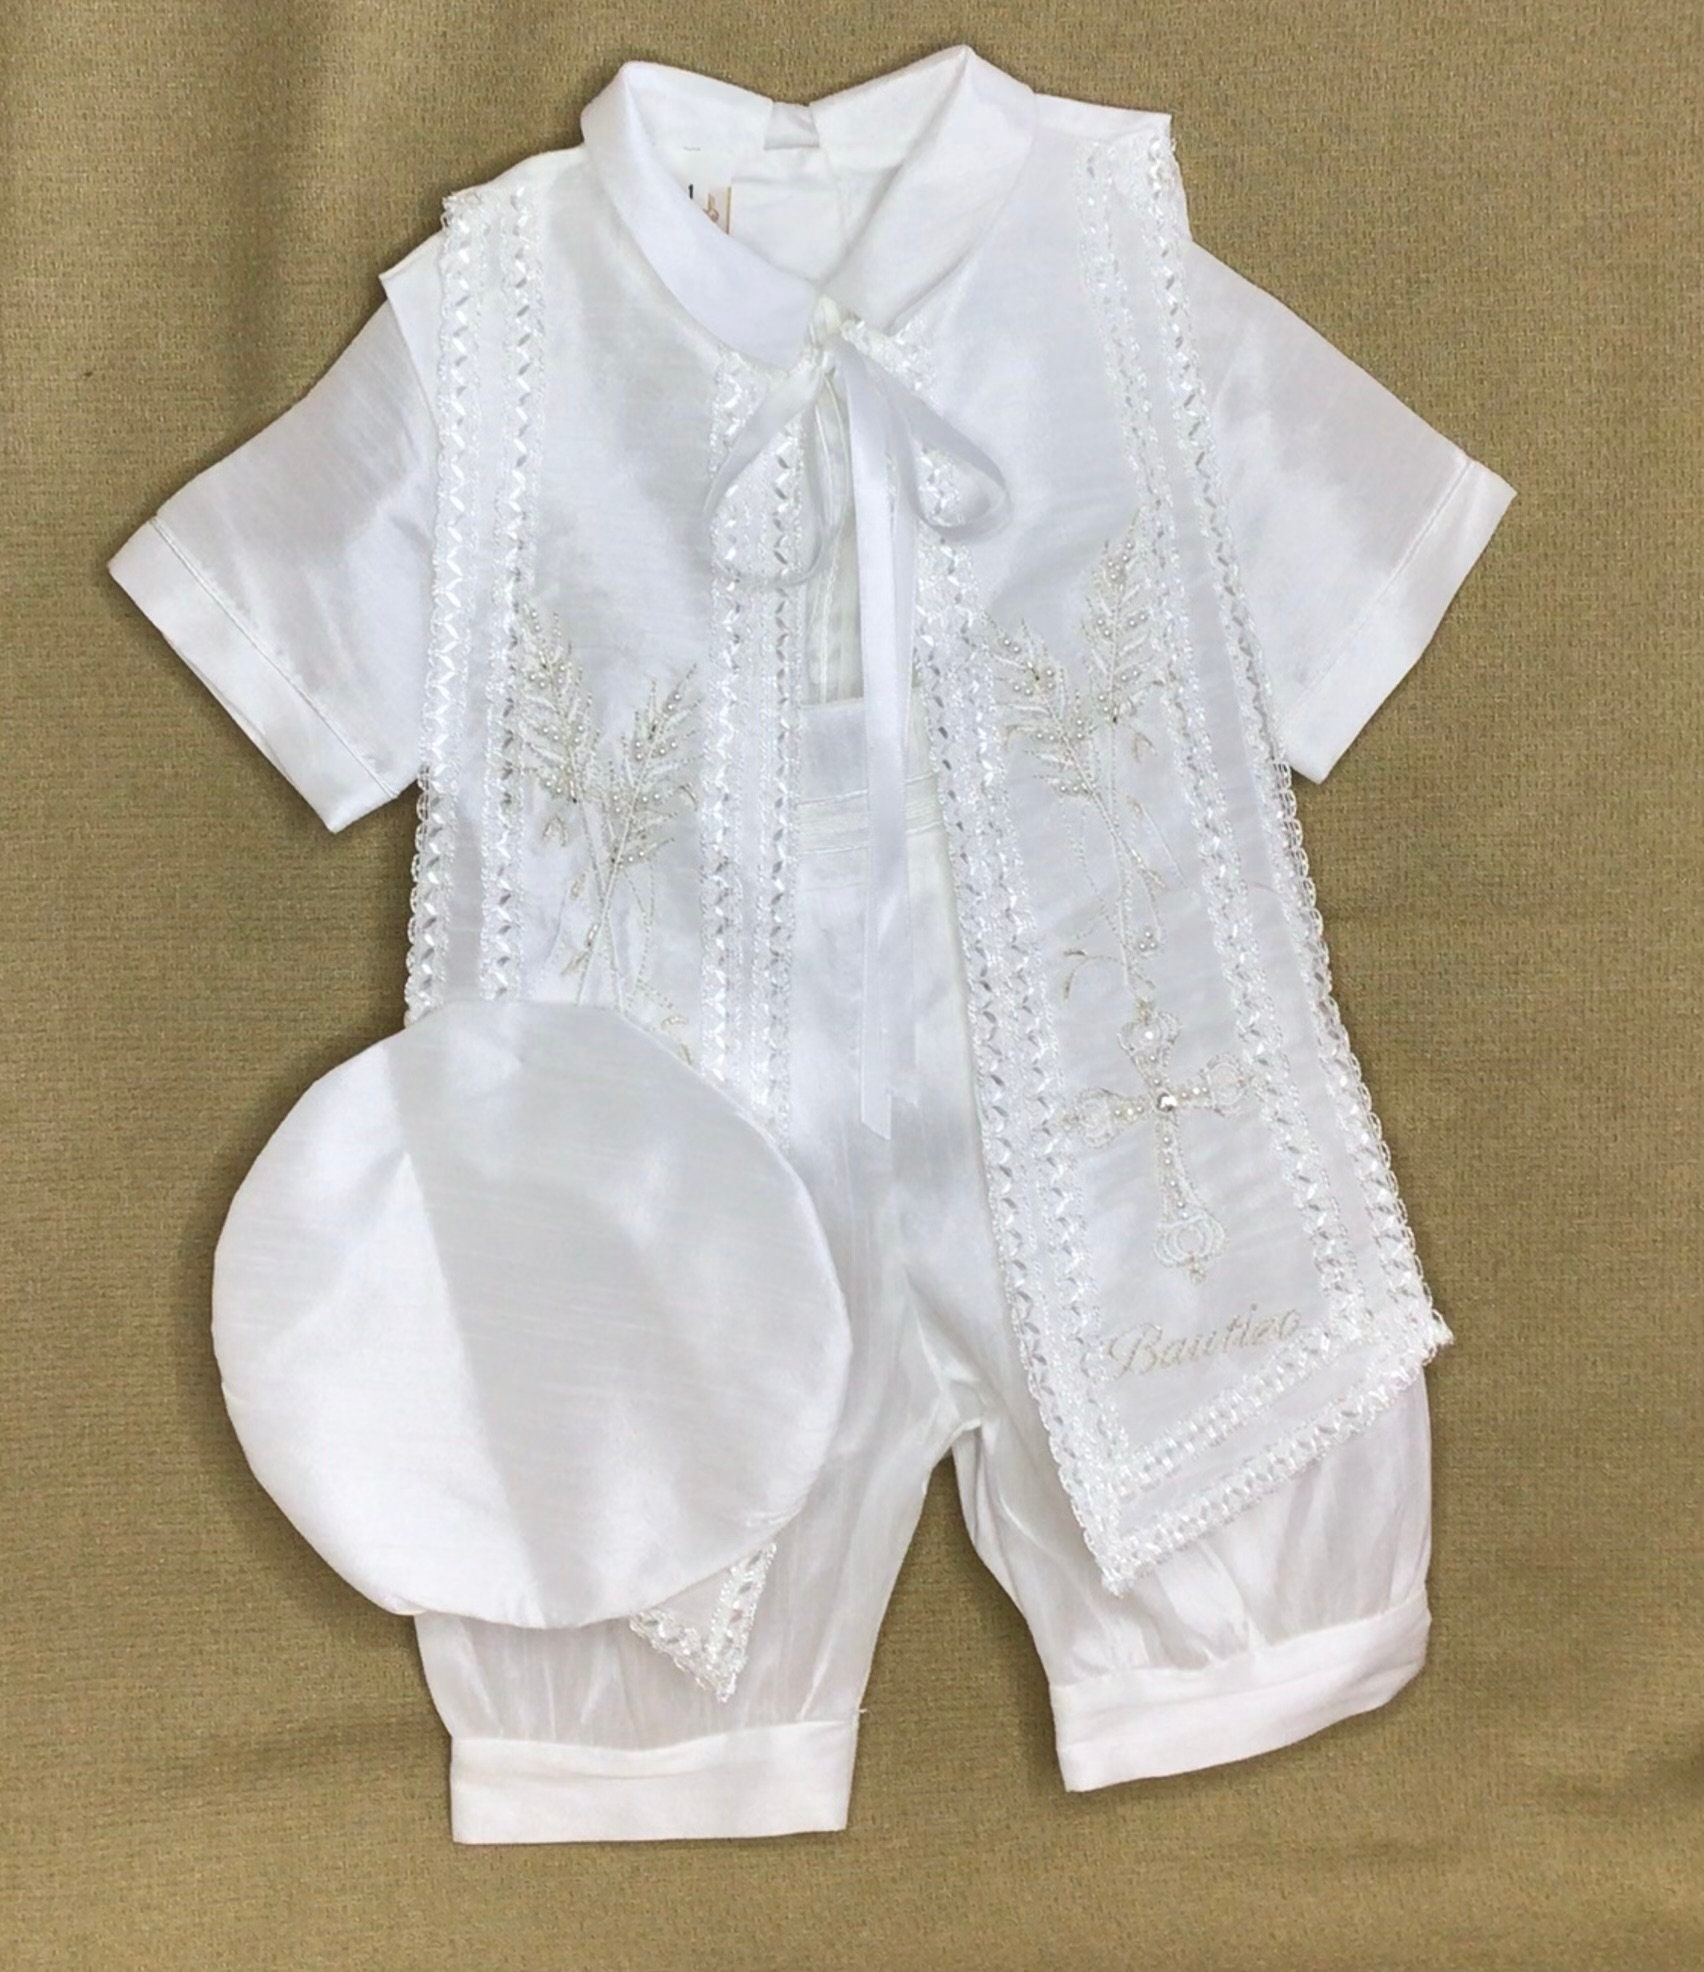 Baby Boy Christening Outfit, Ivory or White Color Blessing or Baptism ...